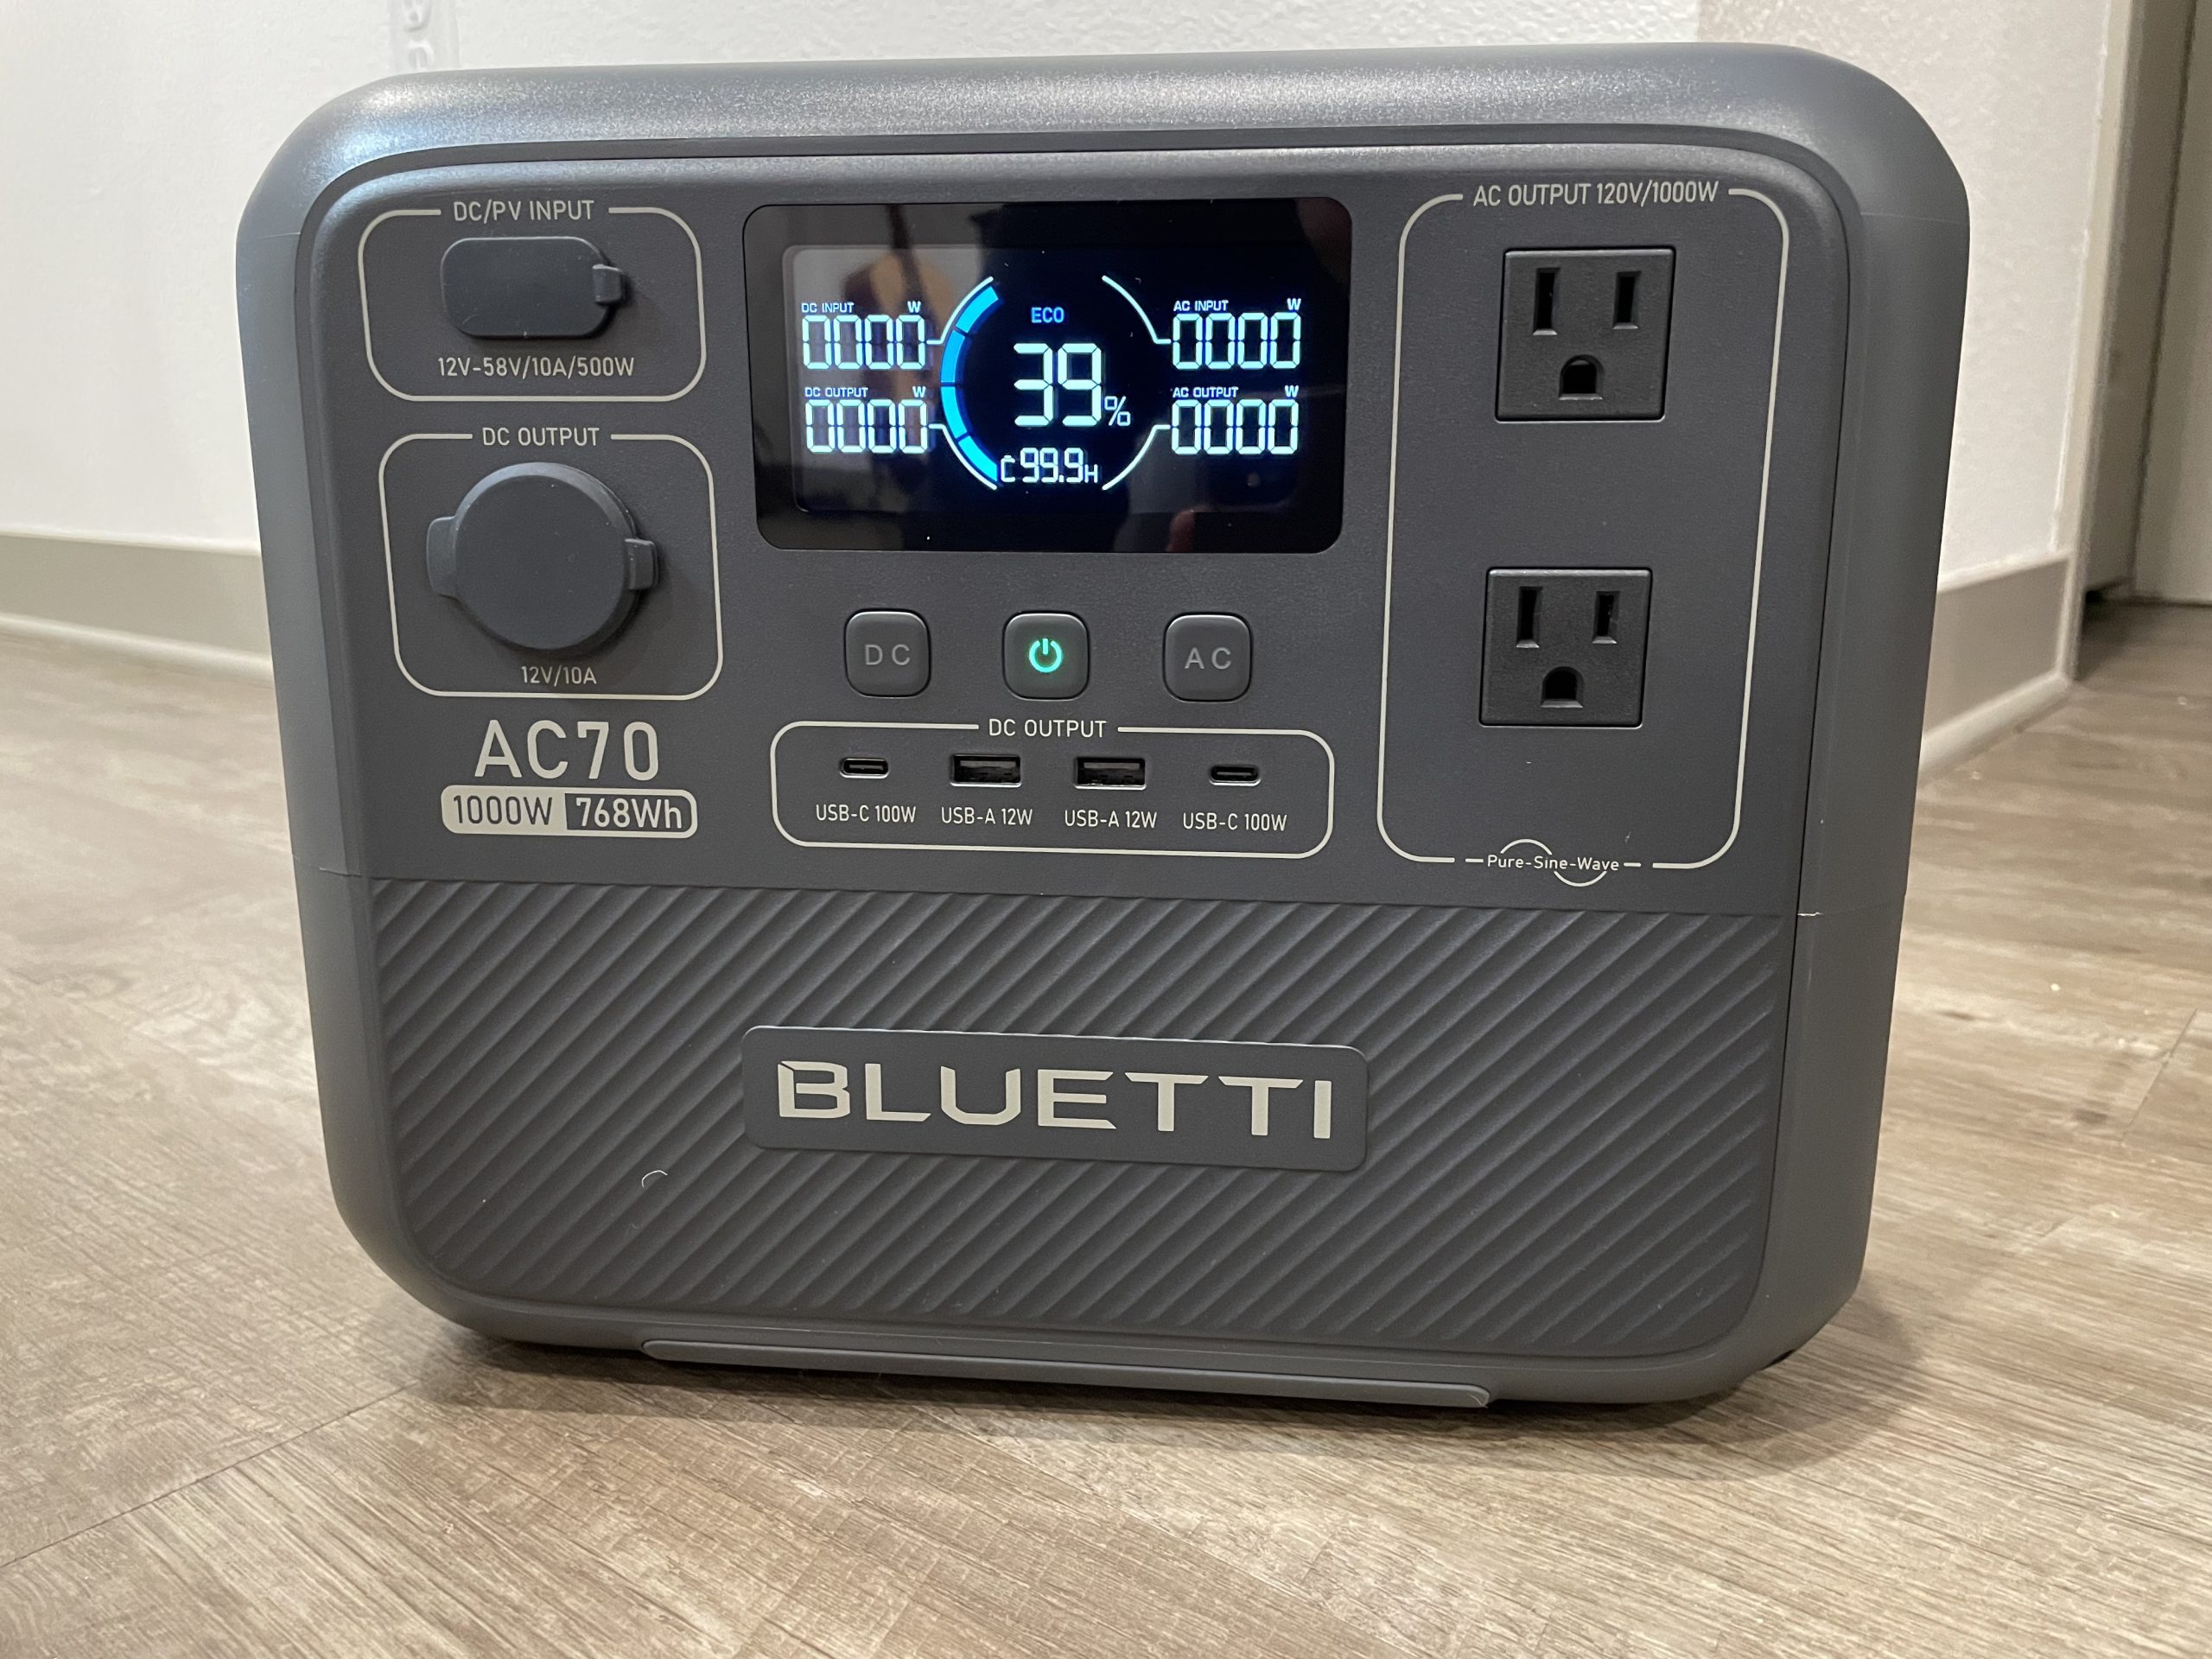 Bluetti AC70 Portable Power Station: Hands-On Review